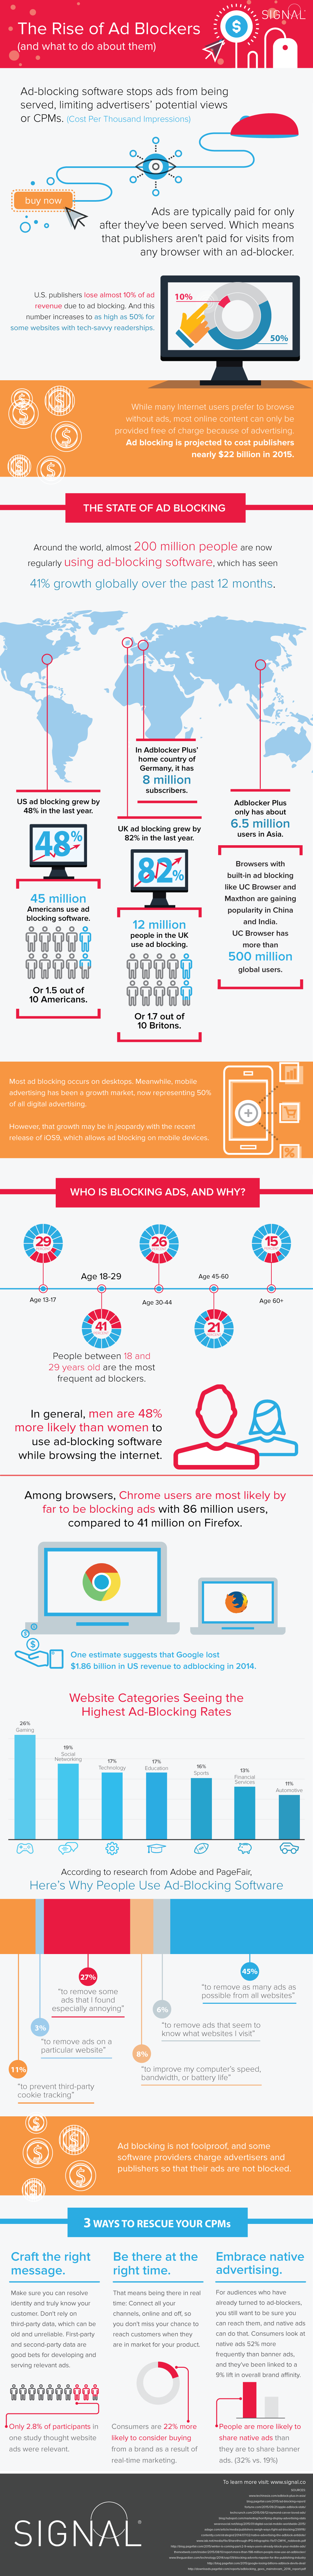 The Rise of Ad Blockers—and What to Do About It - #infographic